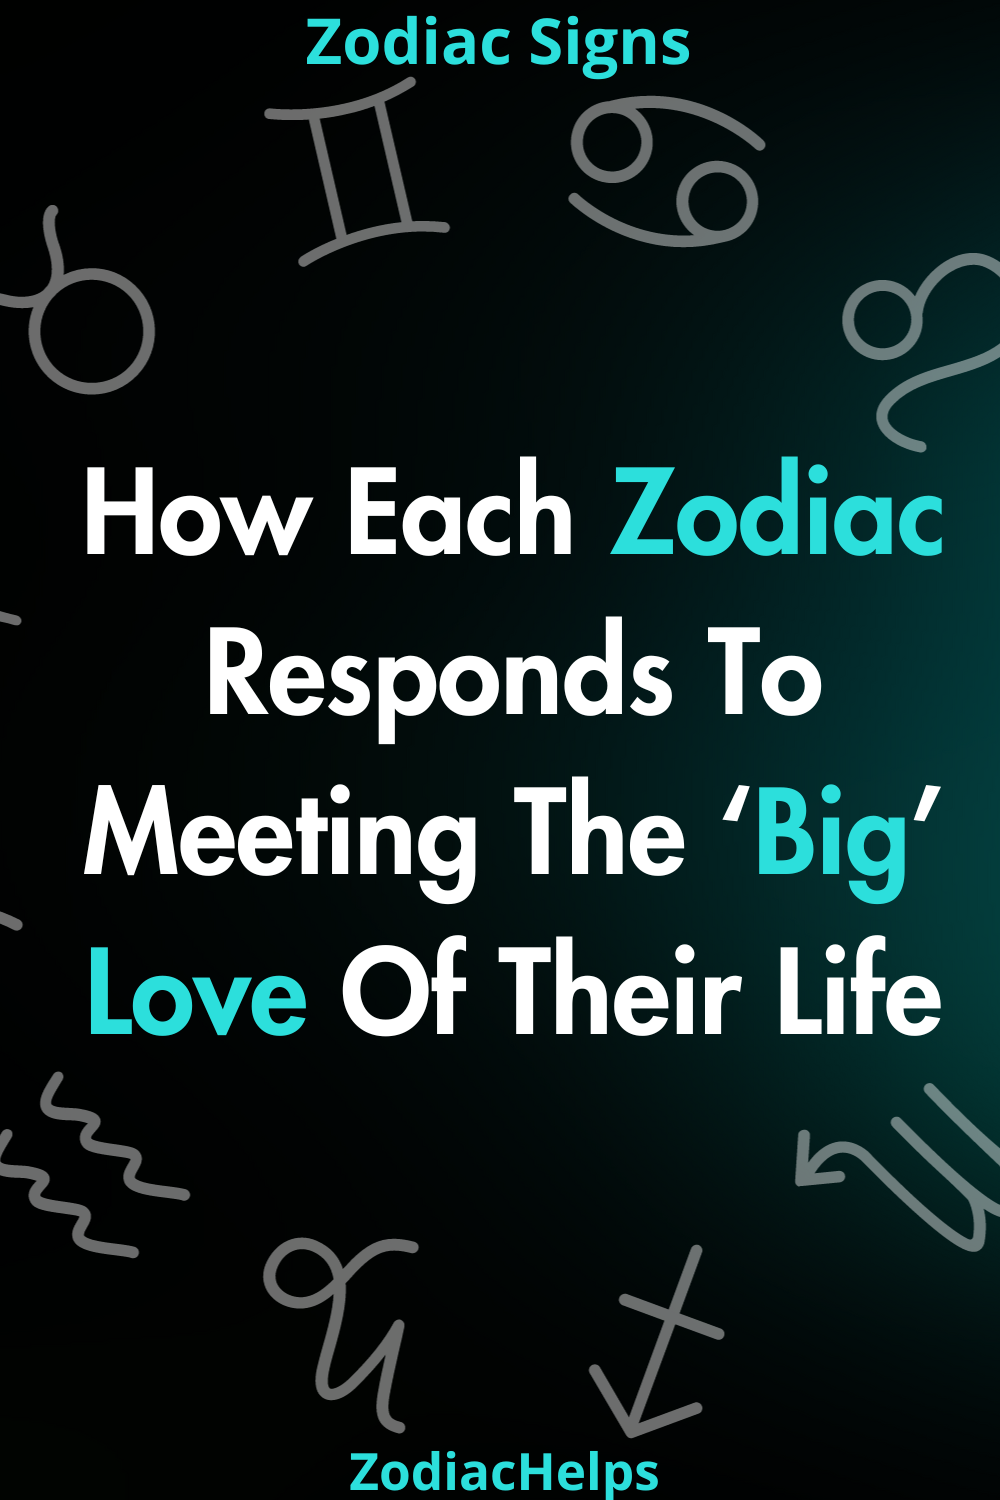 How Each Zodiac Responds To Meeting The ‘Big’ Love Of Their Life